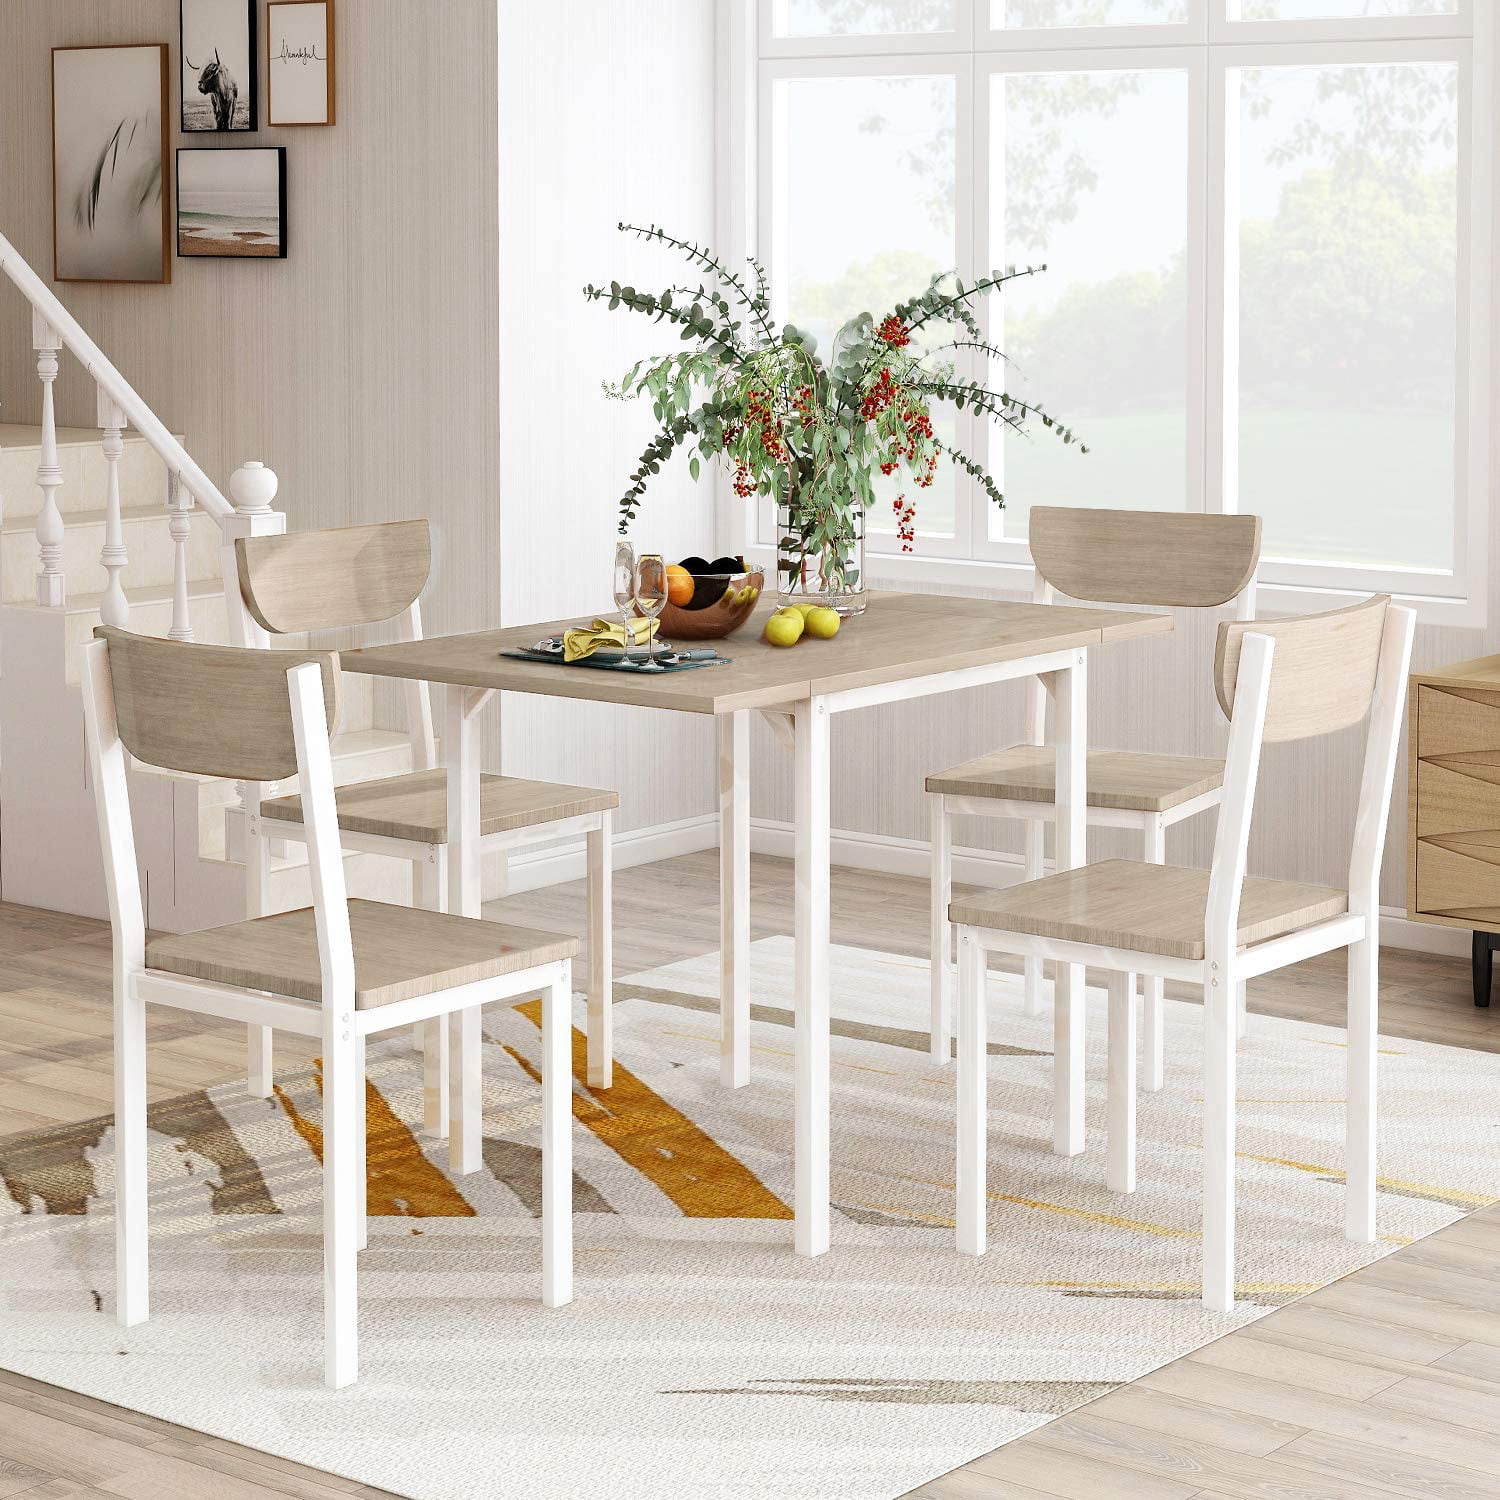 Lemonbest 5 Piece Dining Table Set With, Light Wood Dining Table Set